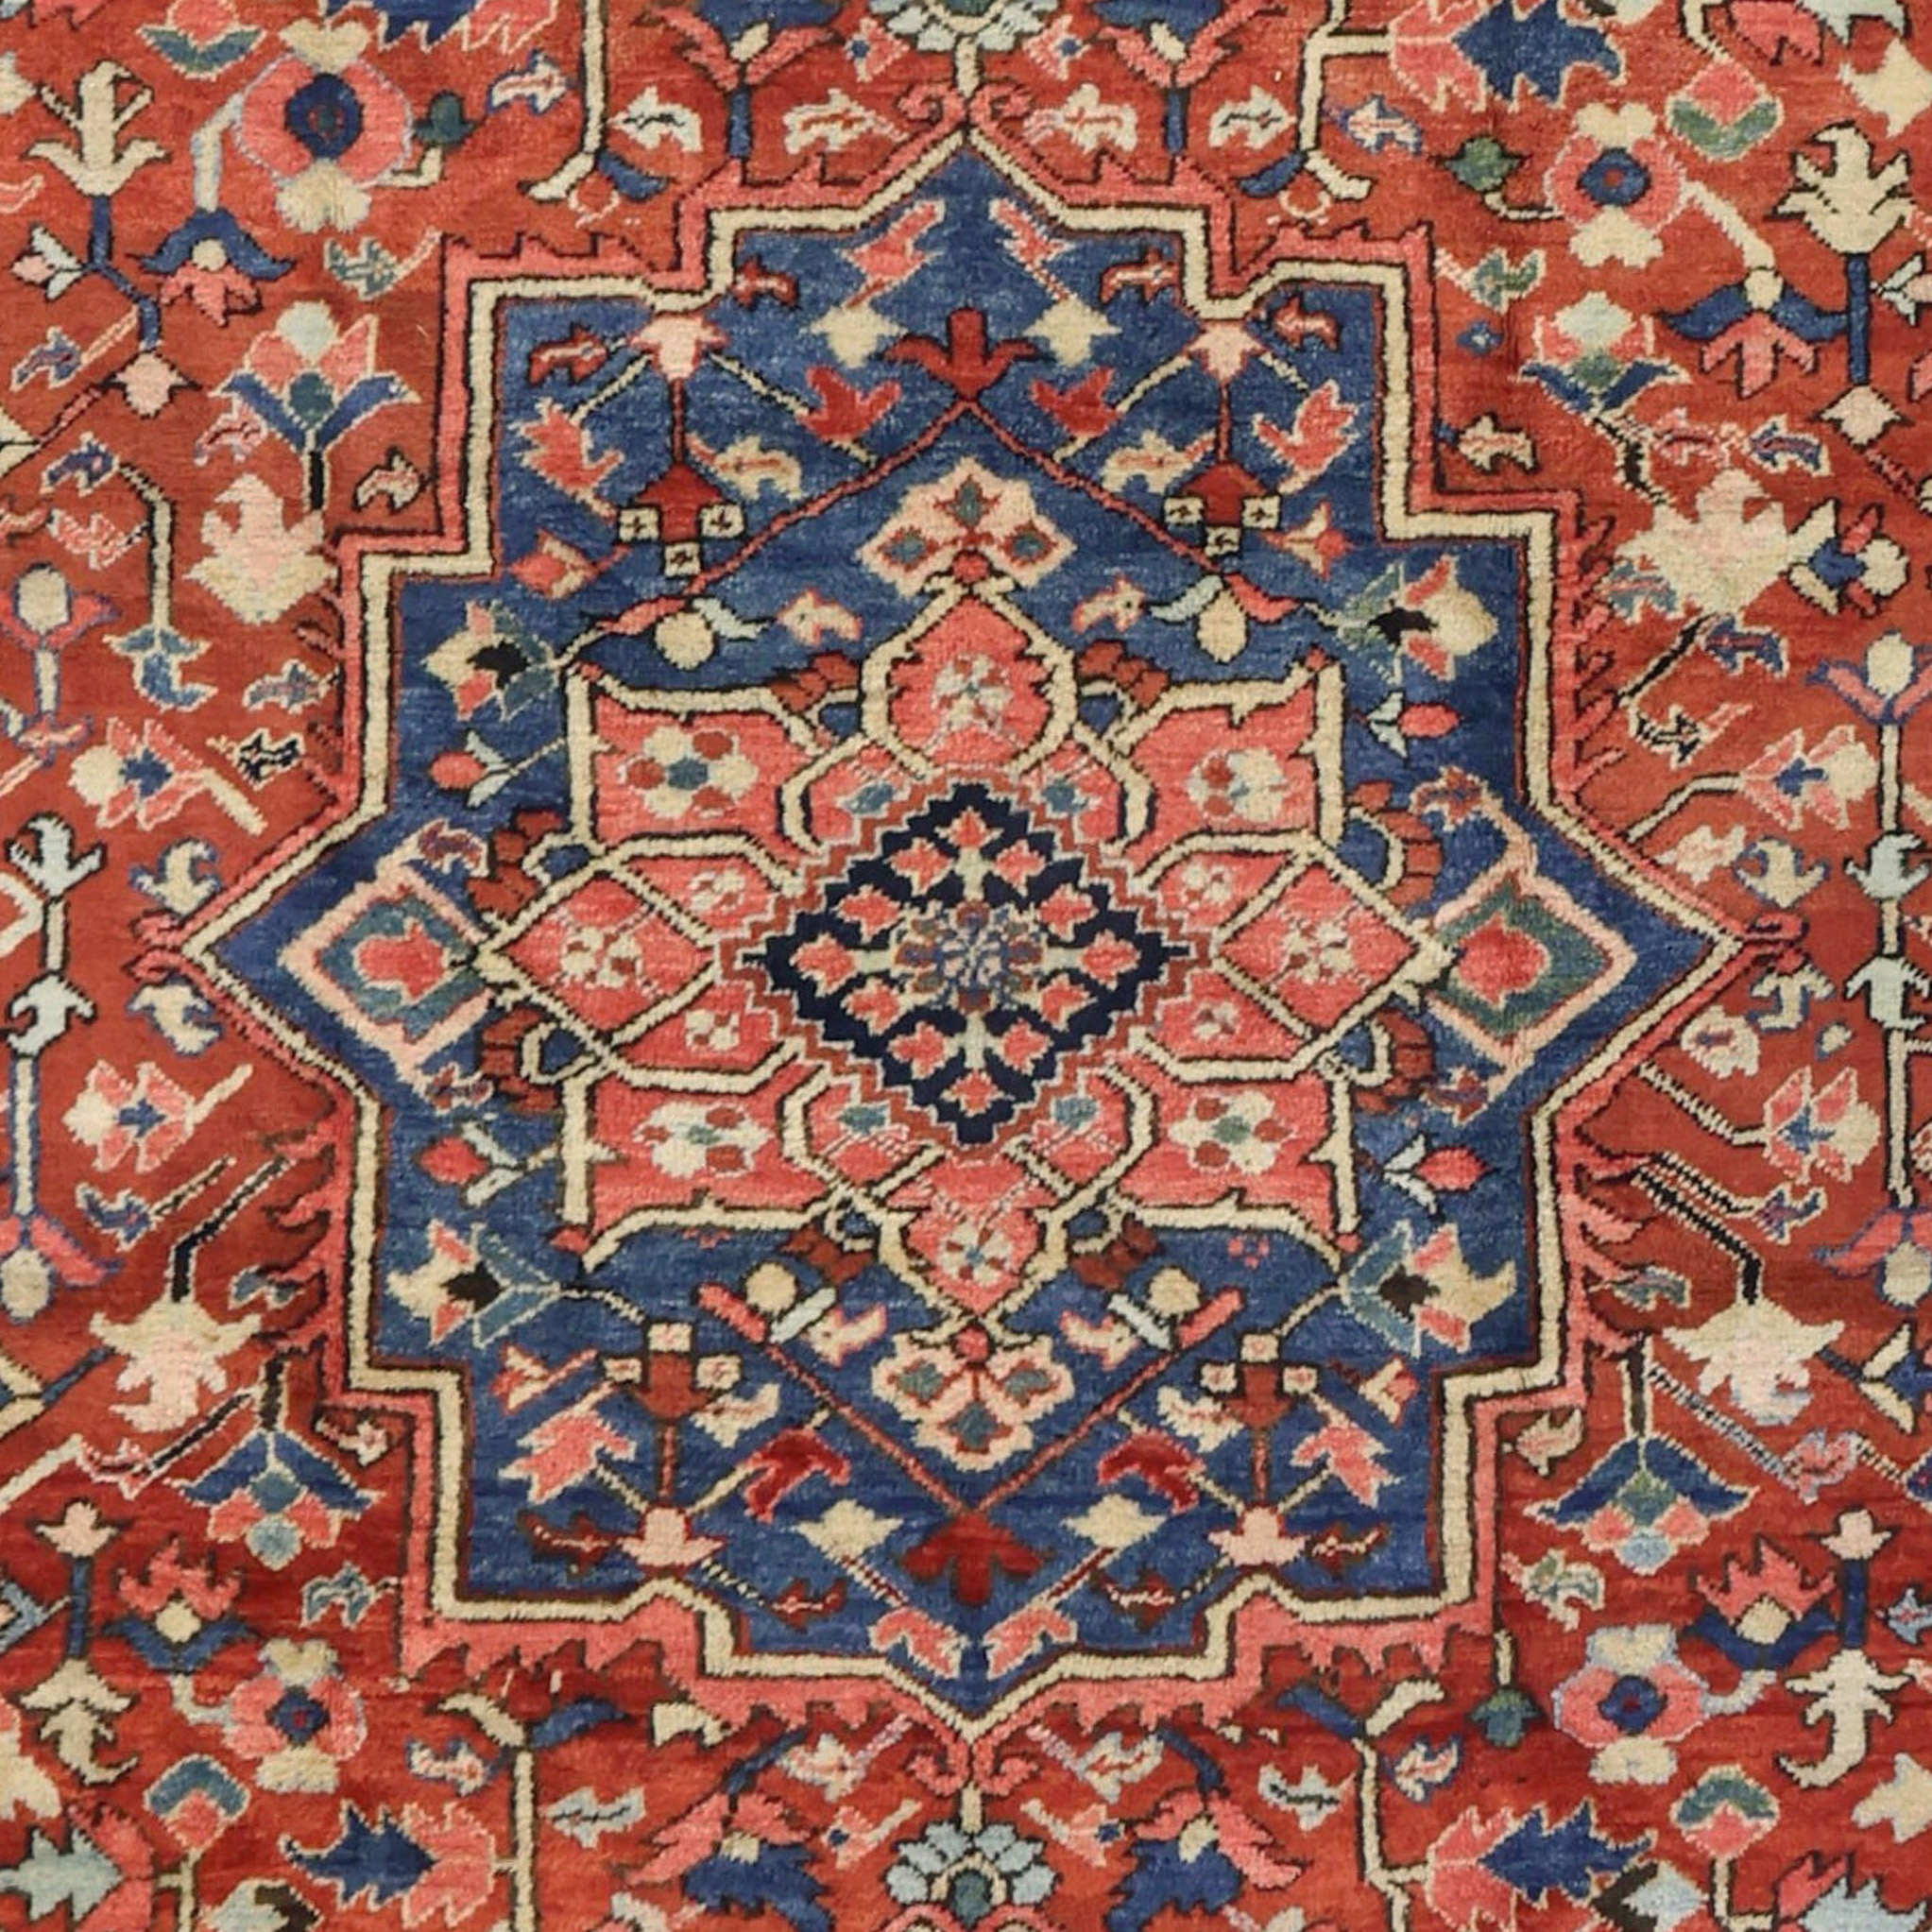 Denim blue and coral medallion detail from an antique Heriz carpet. Douglas Stock Gallery, antique Persian rugs Boston,MA area